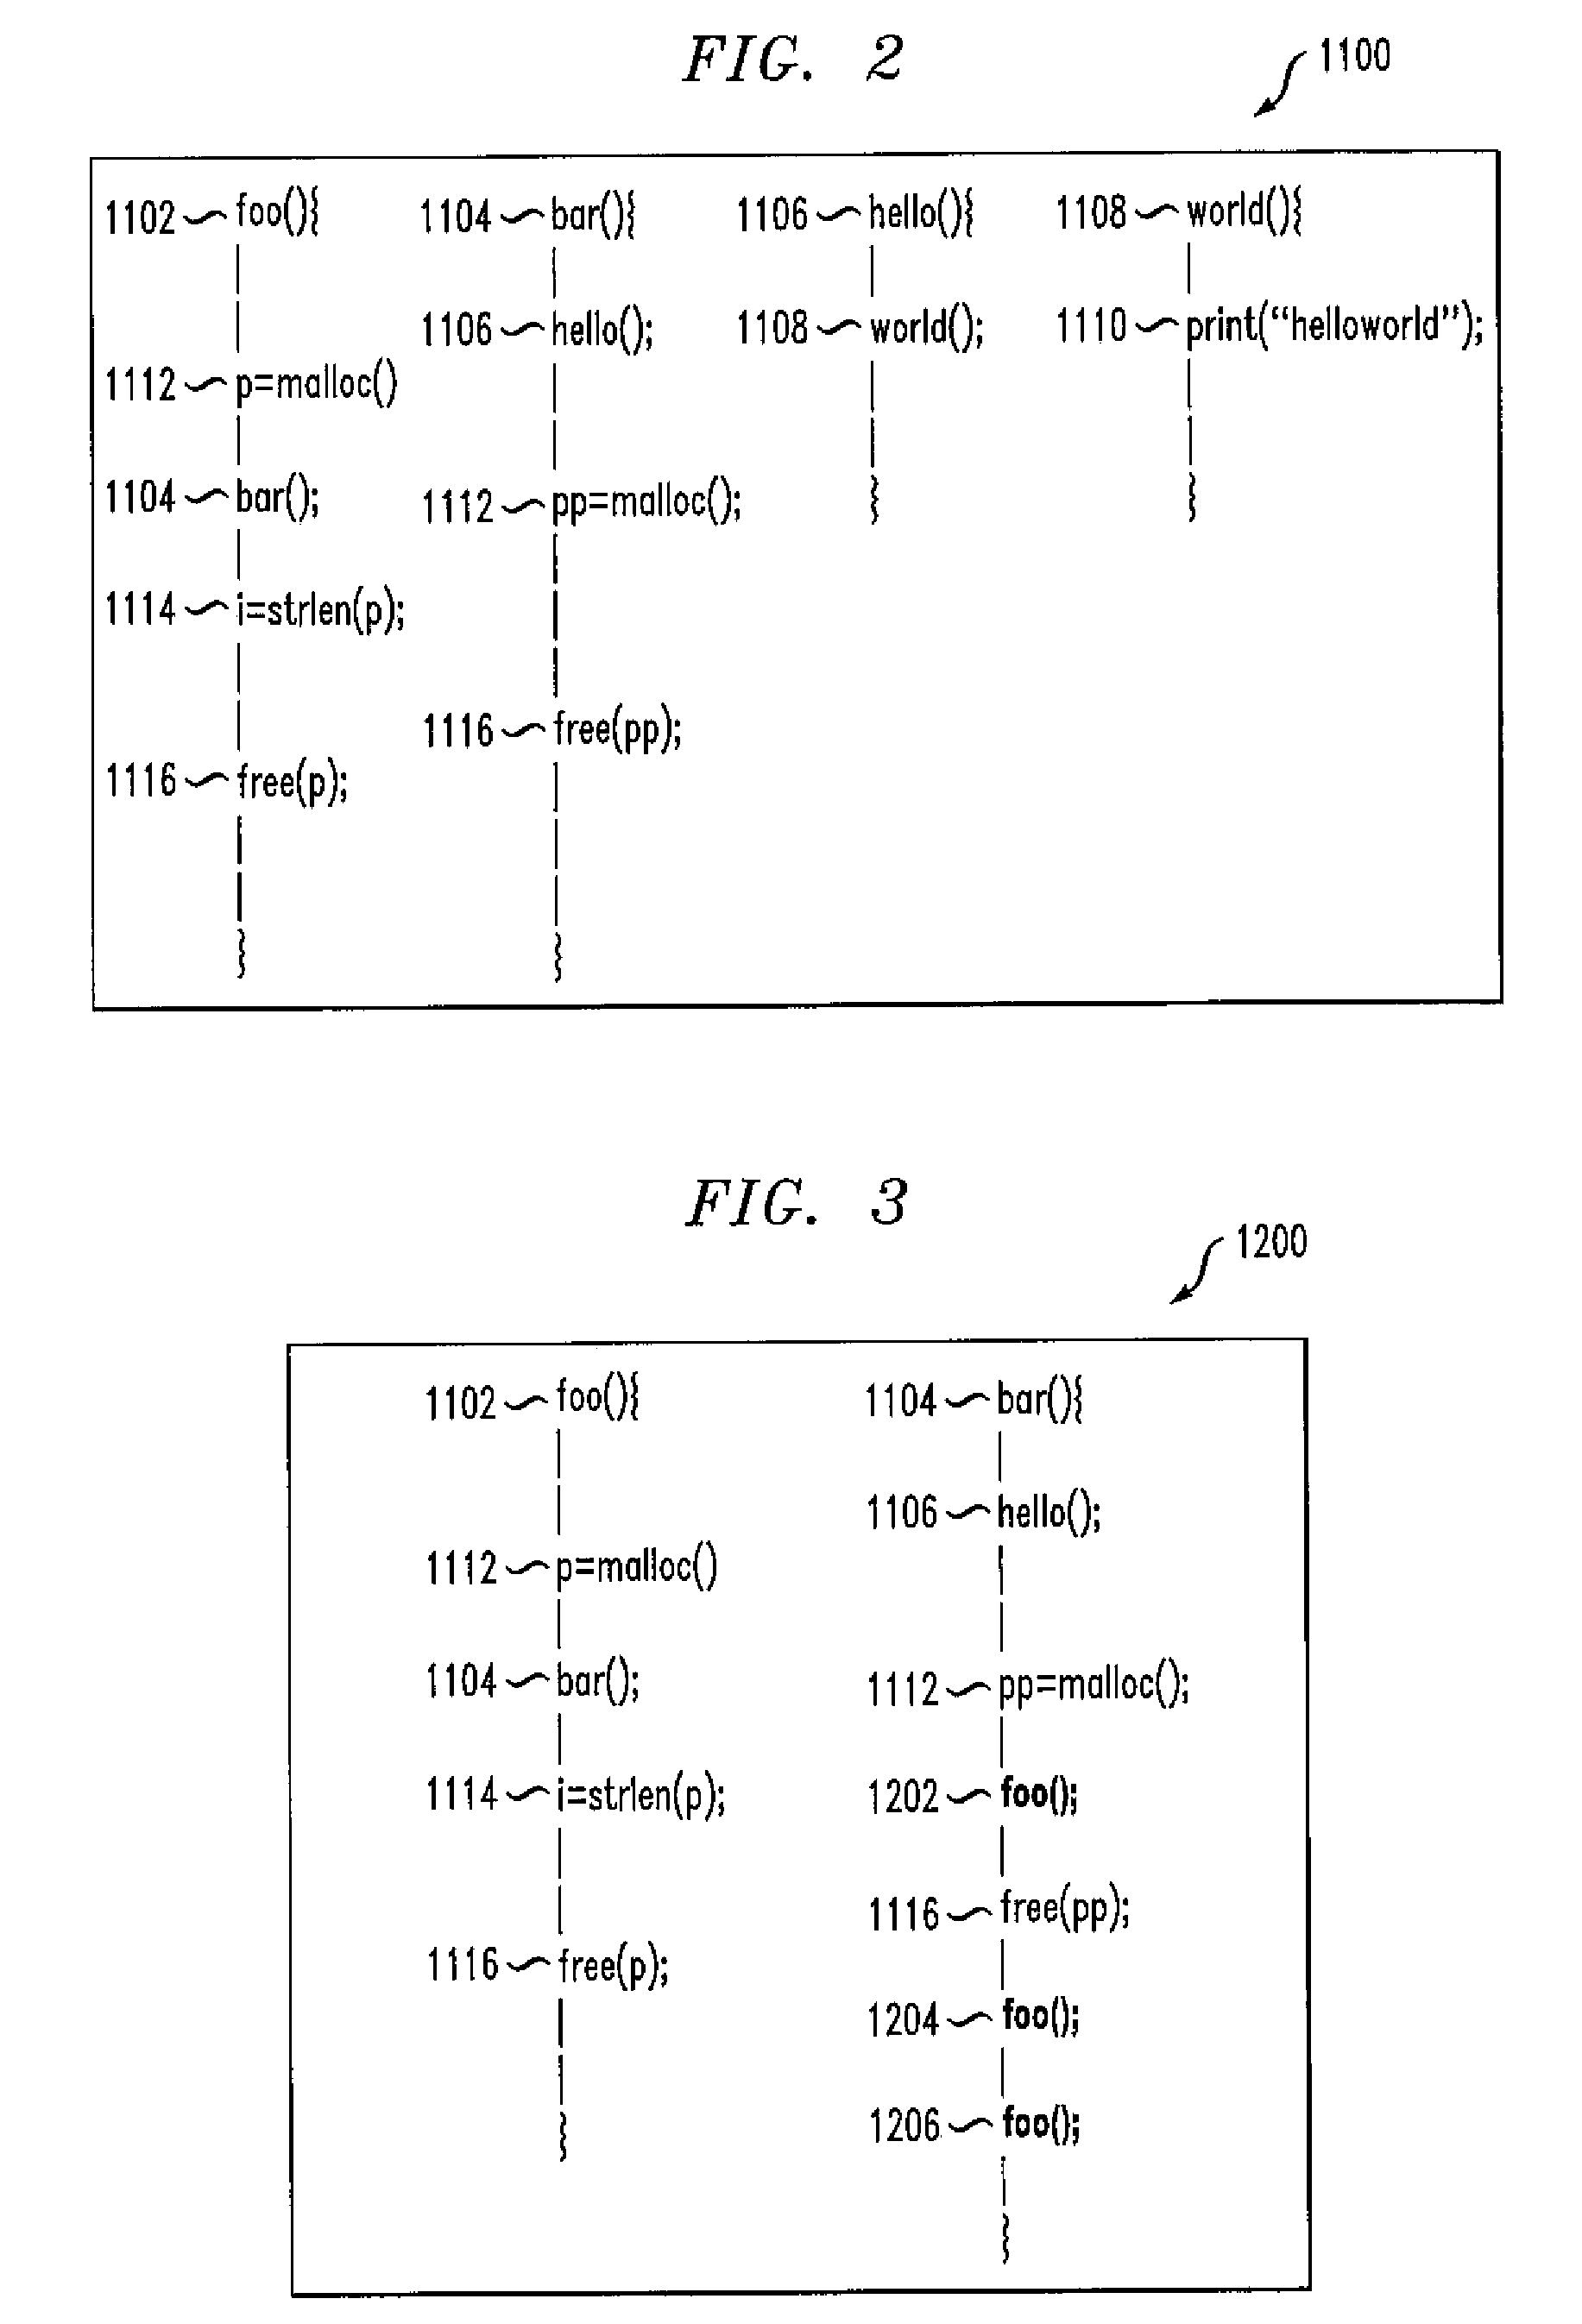 Tracing a calltree of a specified root method